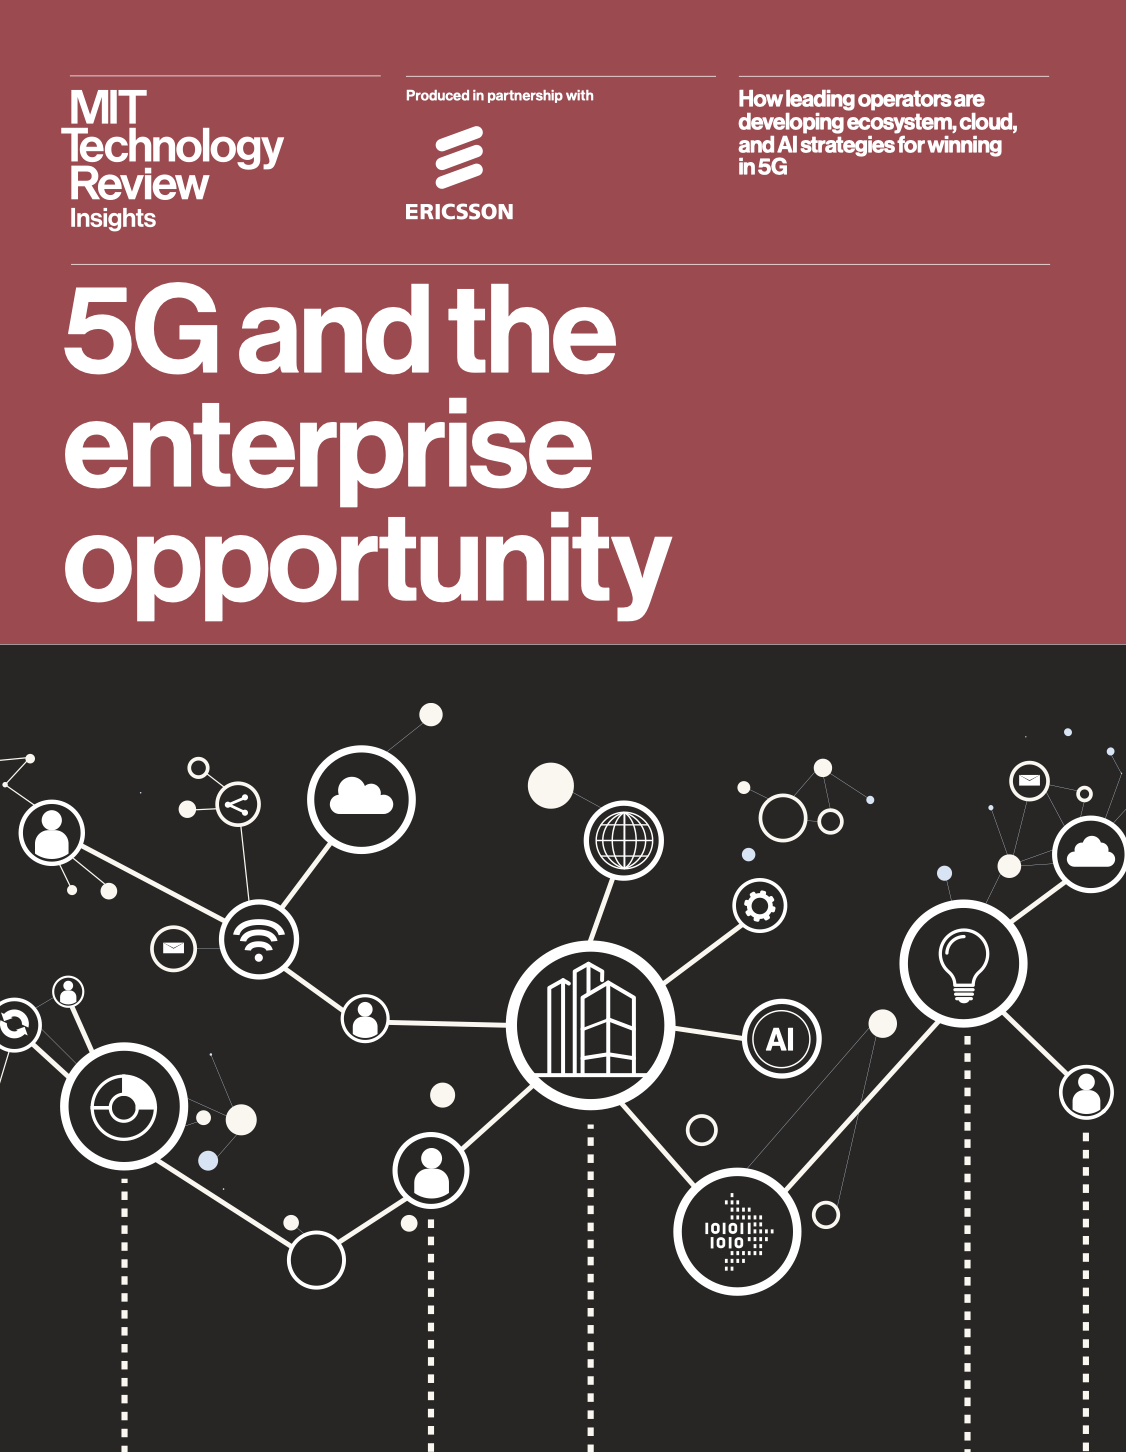 5G and the enterprise opportunity